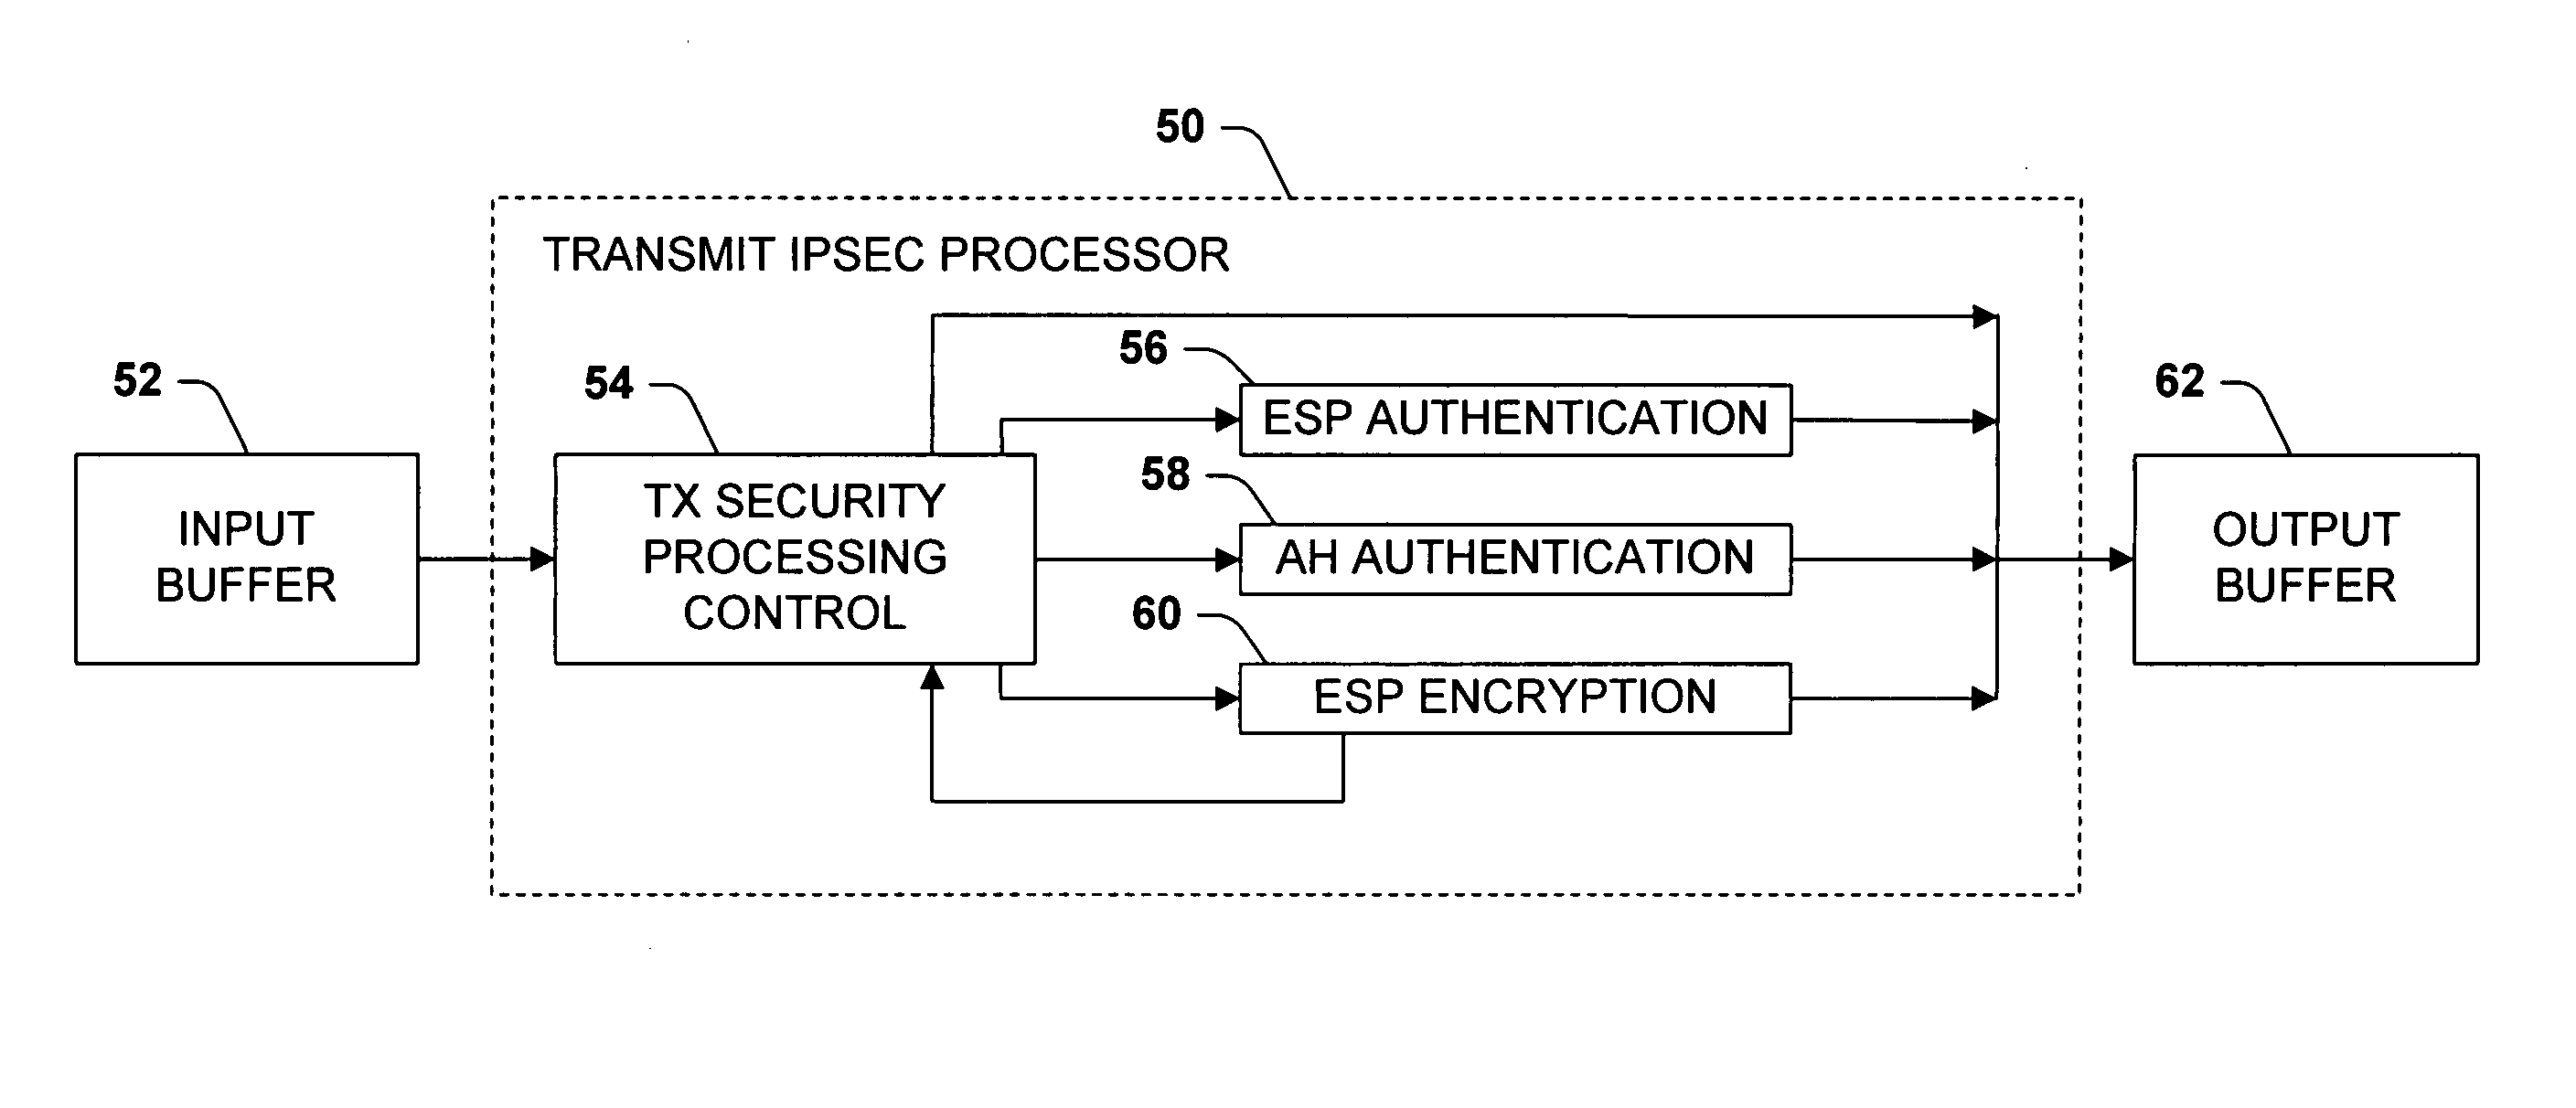 Two parallel engines for high speed transmit IPSEC processing